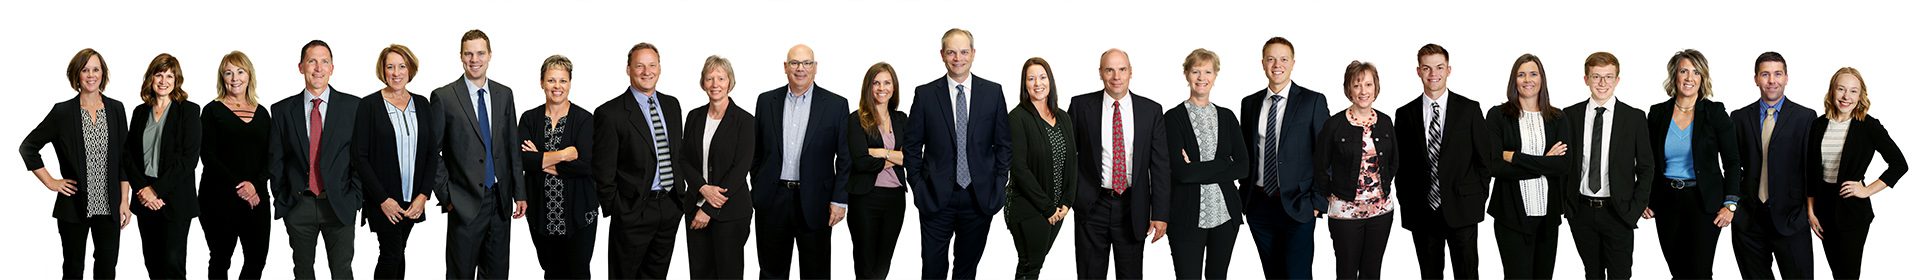 Meet Our Team - Van Engelenhoven Agency Team Posing Together for a Photo